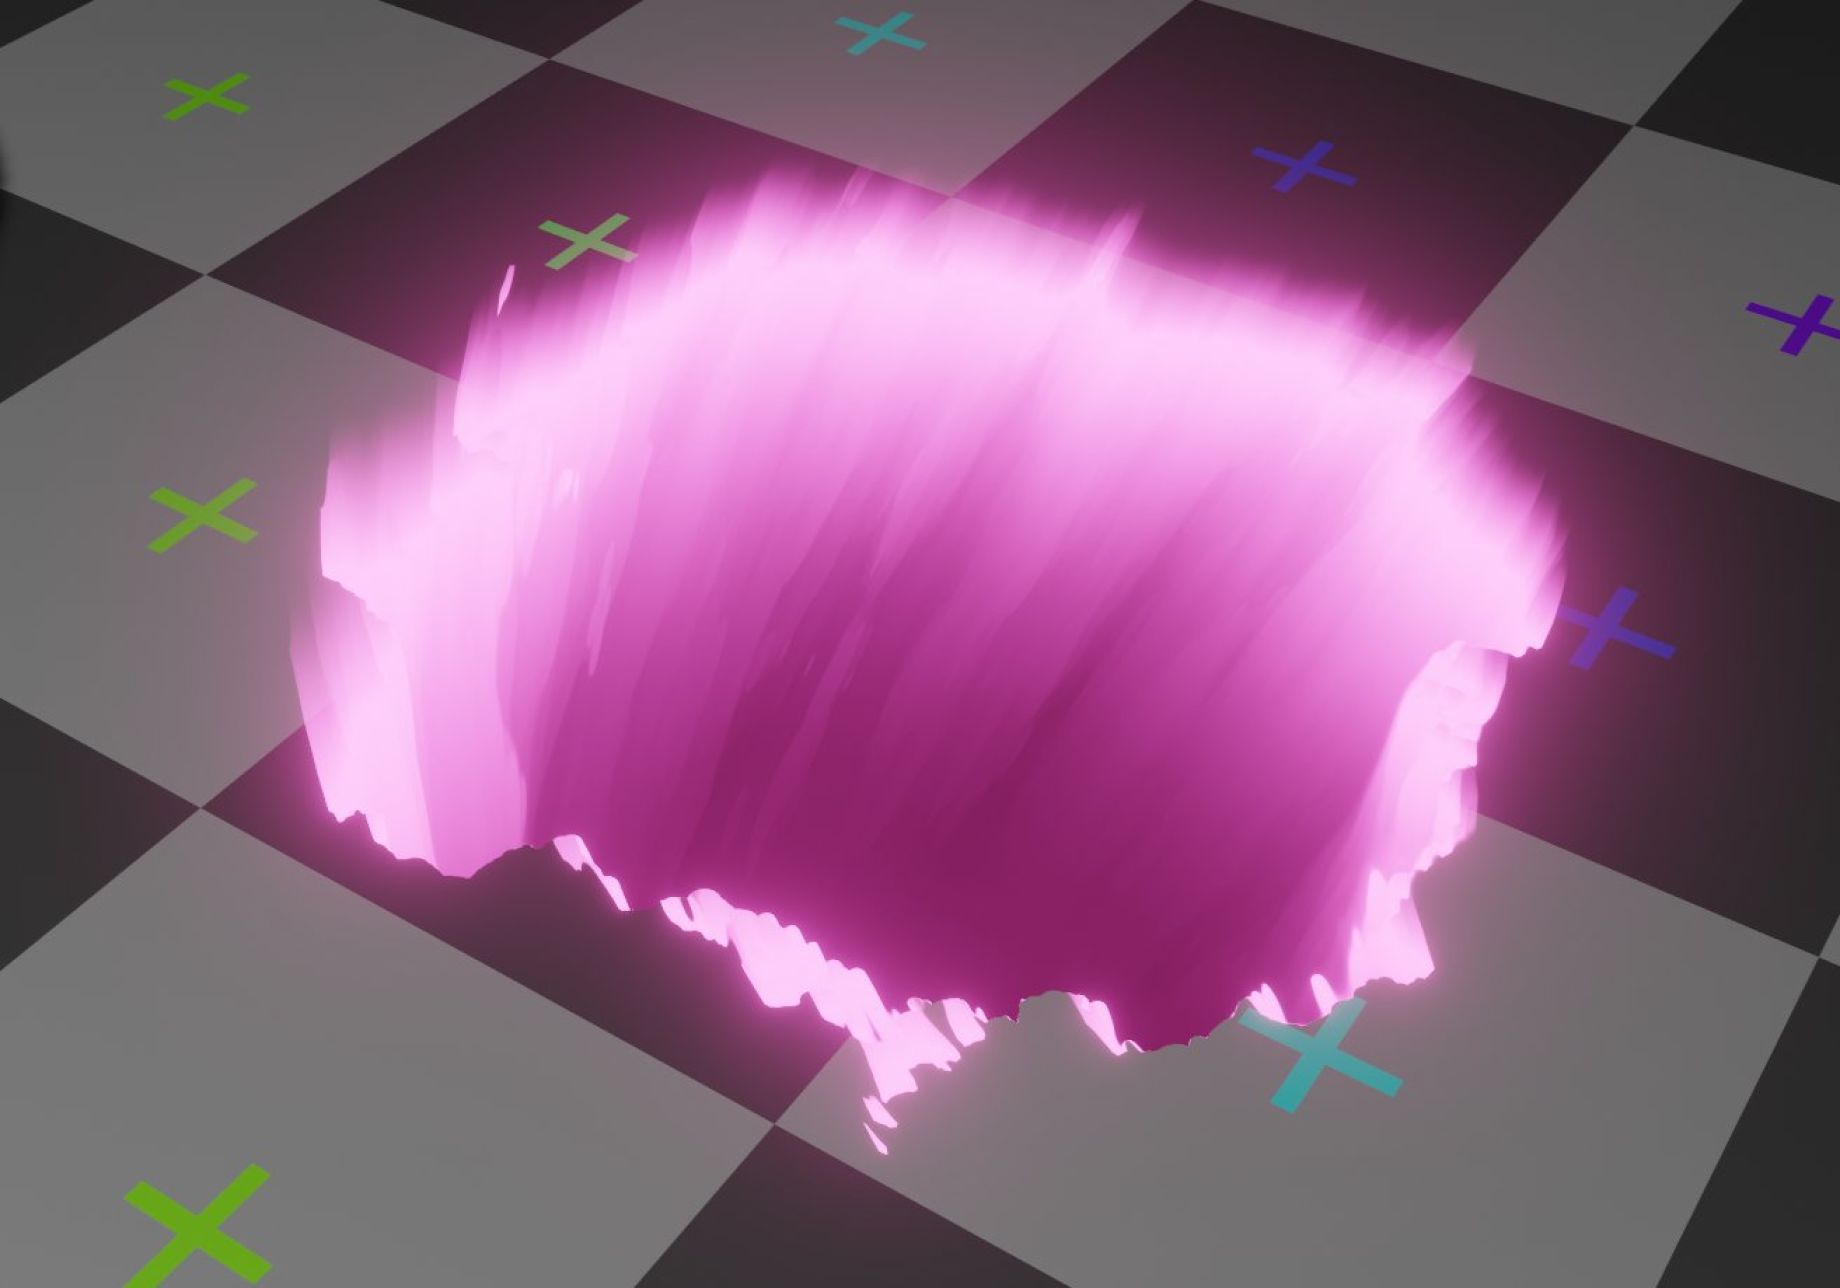 How To Change Your Roblox Background and Get Pink Blender